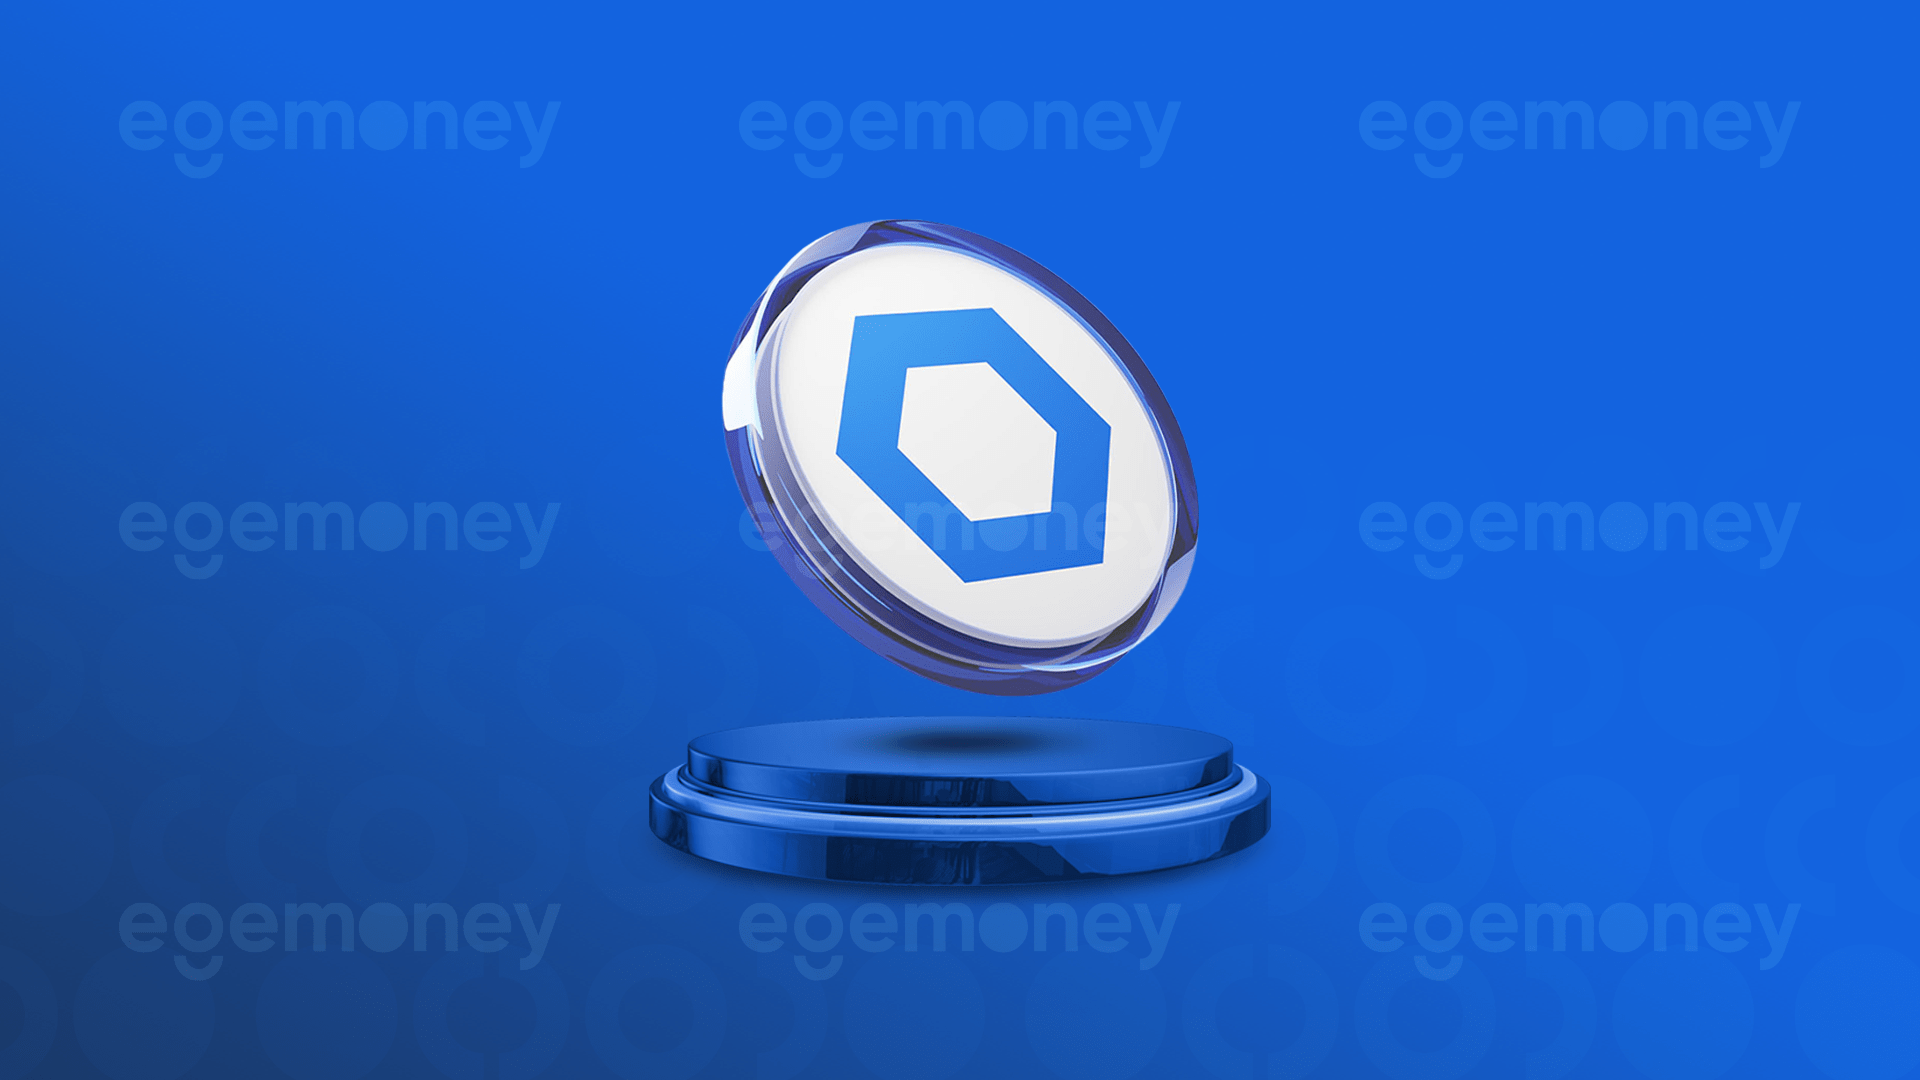 EgeMoney Strengthens with Chainlink (LINK)!